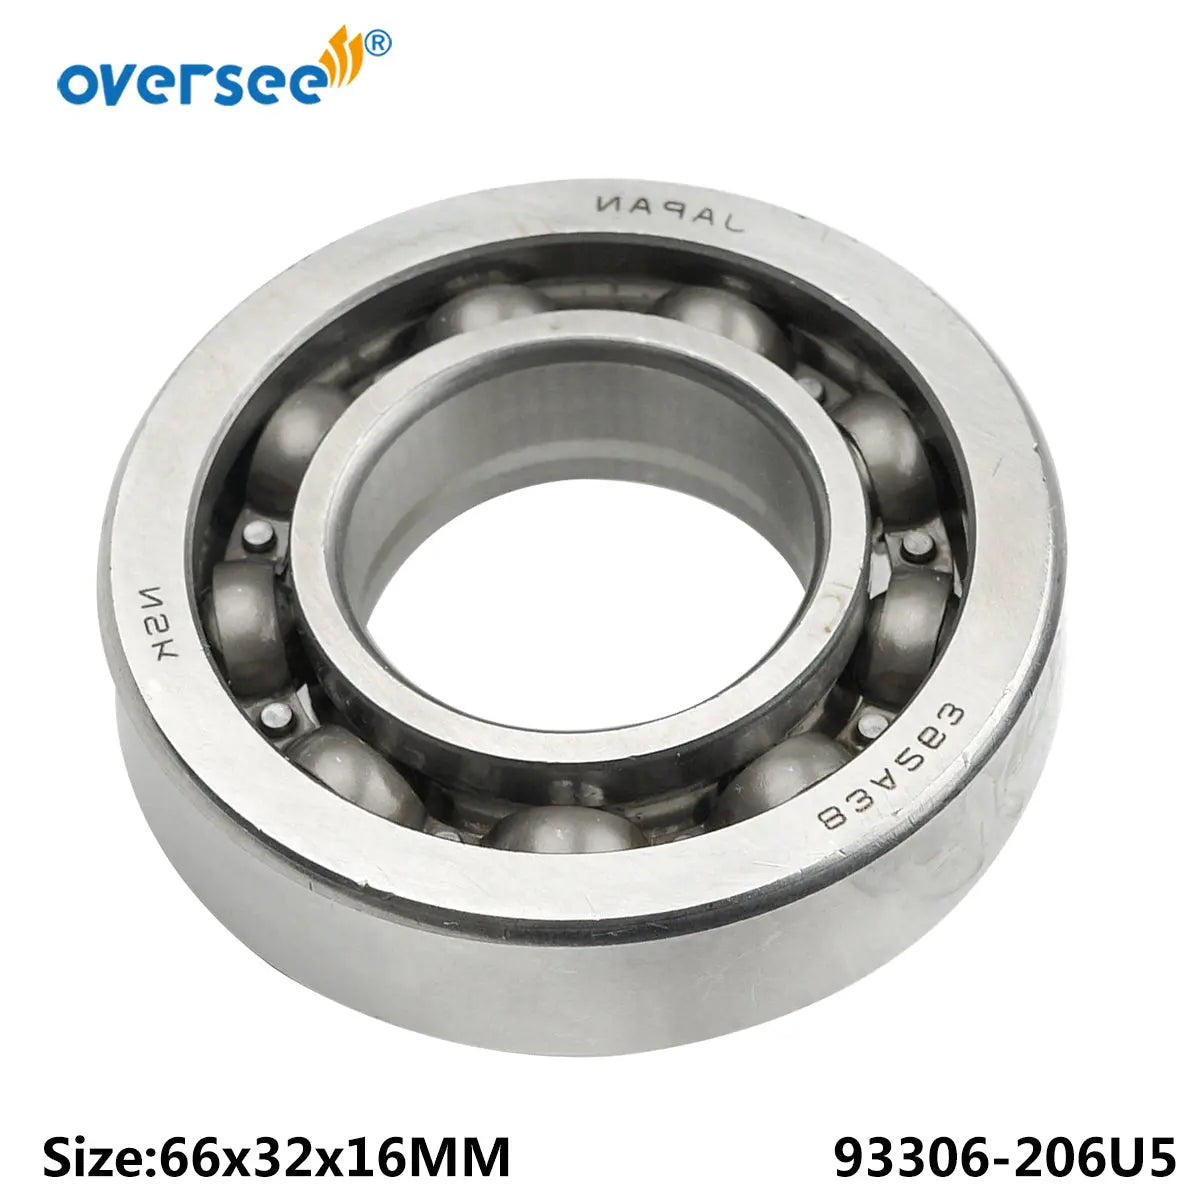 Oversee Marine 93306-206U5-00 Bearing Replacement For Yamaha 85HP 90HP Outboard Engine Top Real